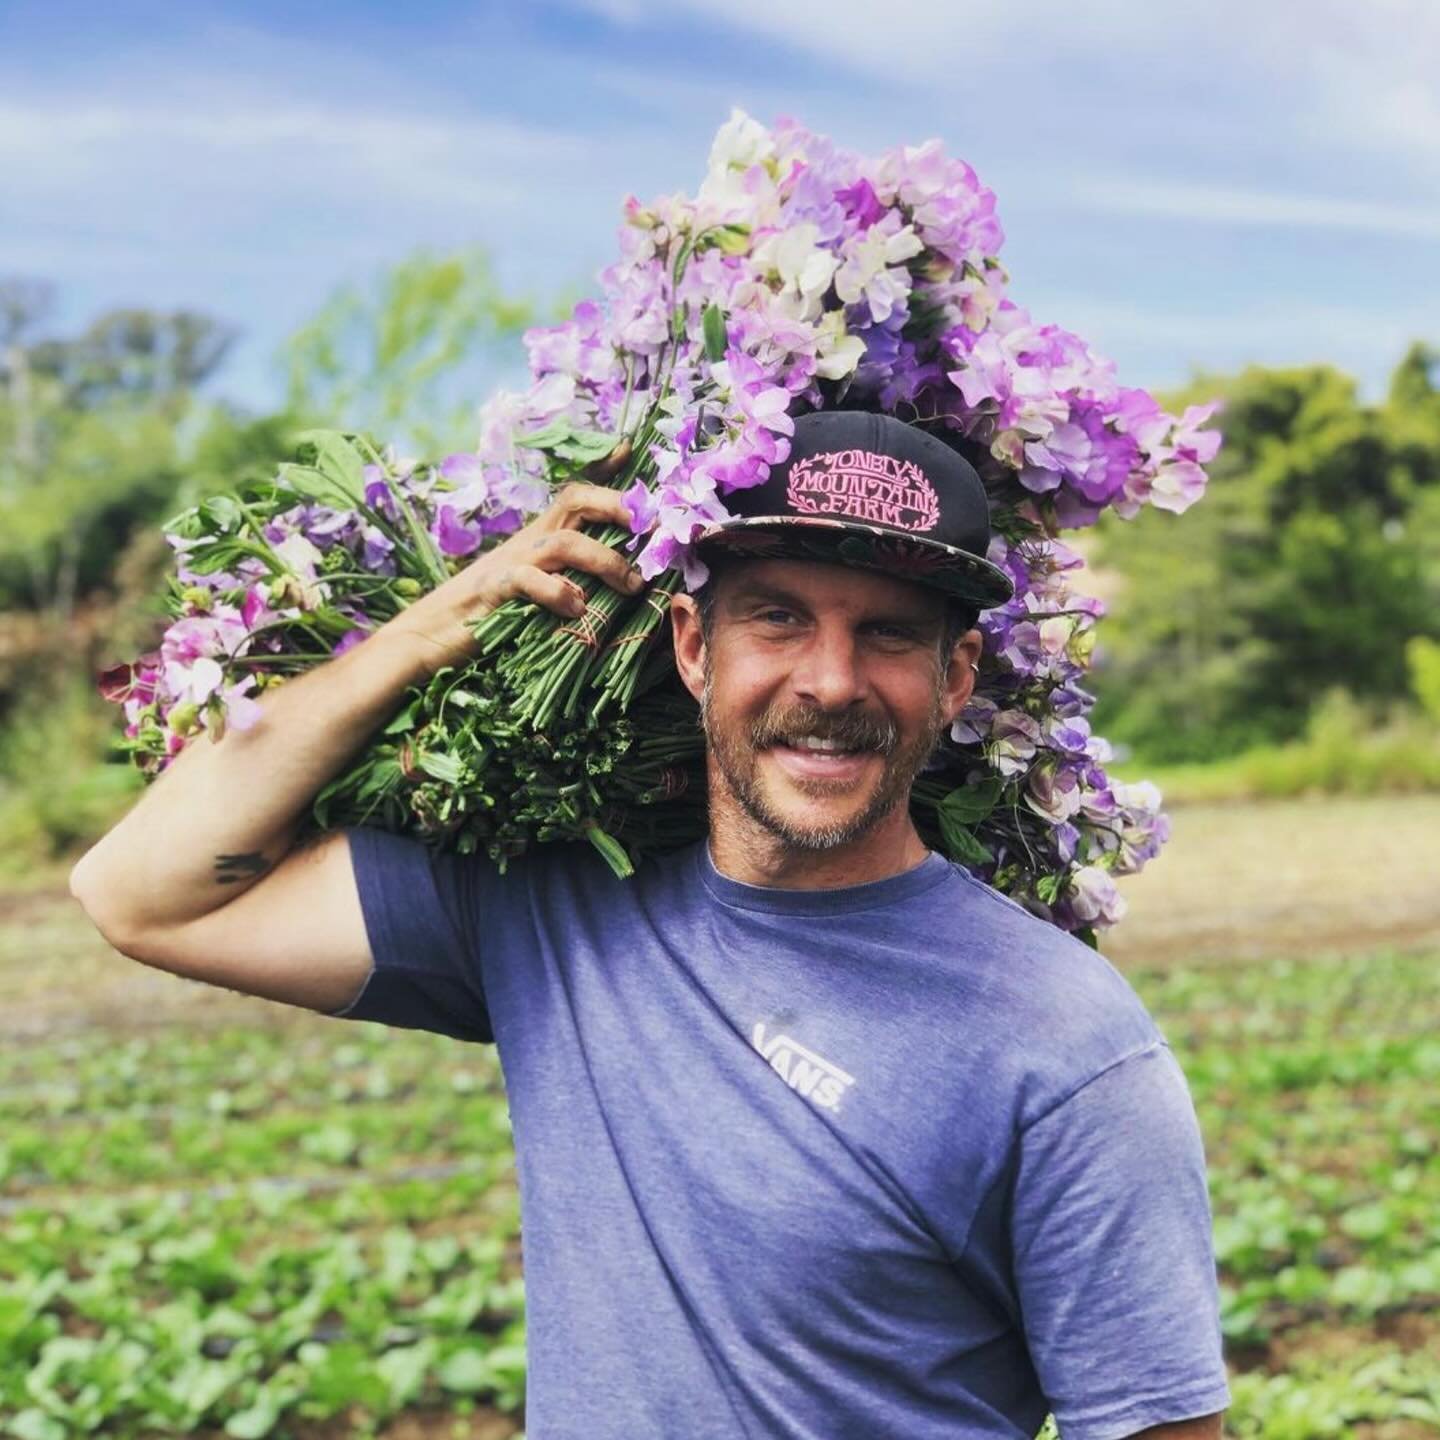 Returning for the season at Thursday Marin Farmers Market for a farm-fresh reunion! Lonely Mountain Farm has a bounty of organic delights - from vibrant veggies to fragrant flowers. Balakian Farms will have juicy stone fruits and heirloom tomatoes. S